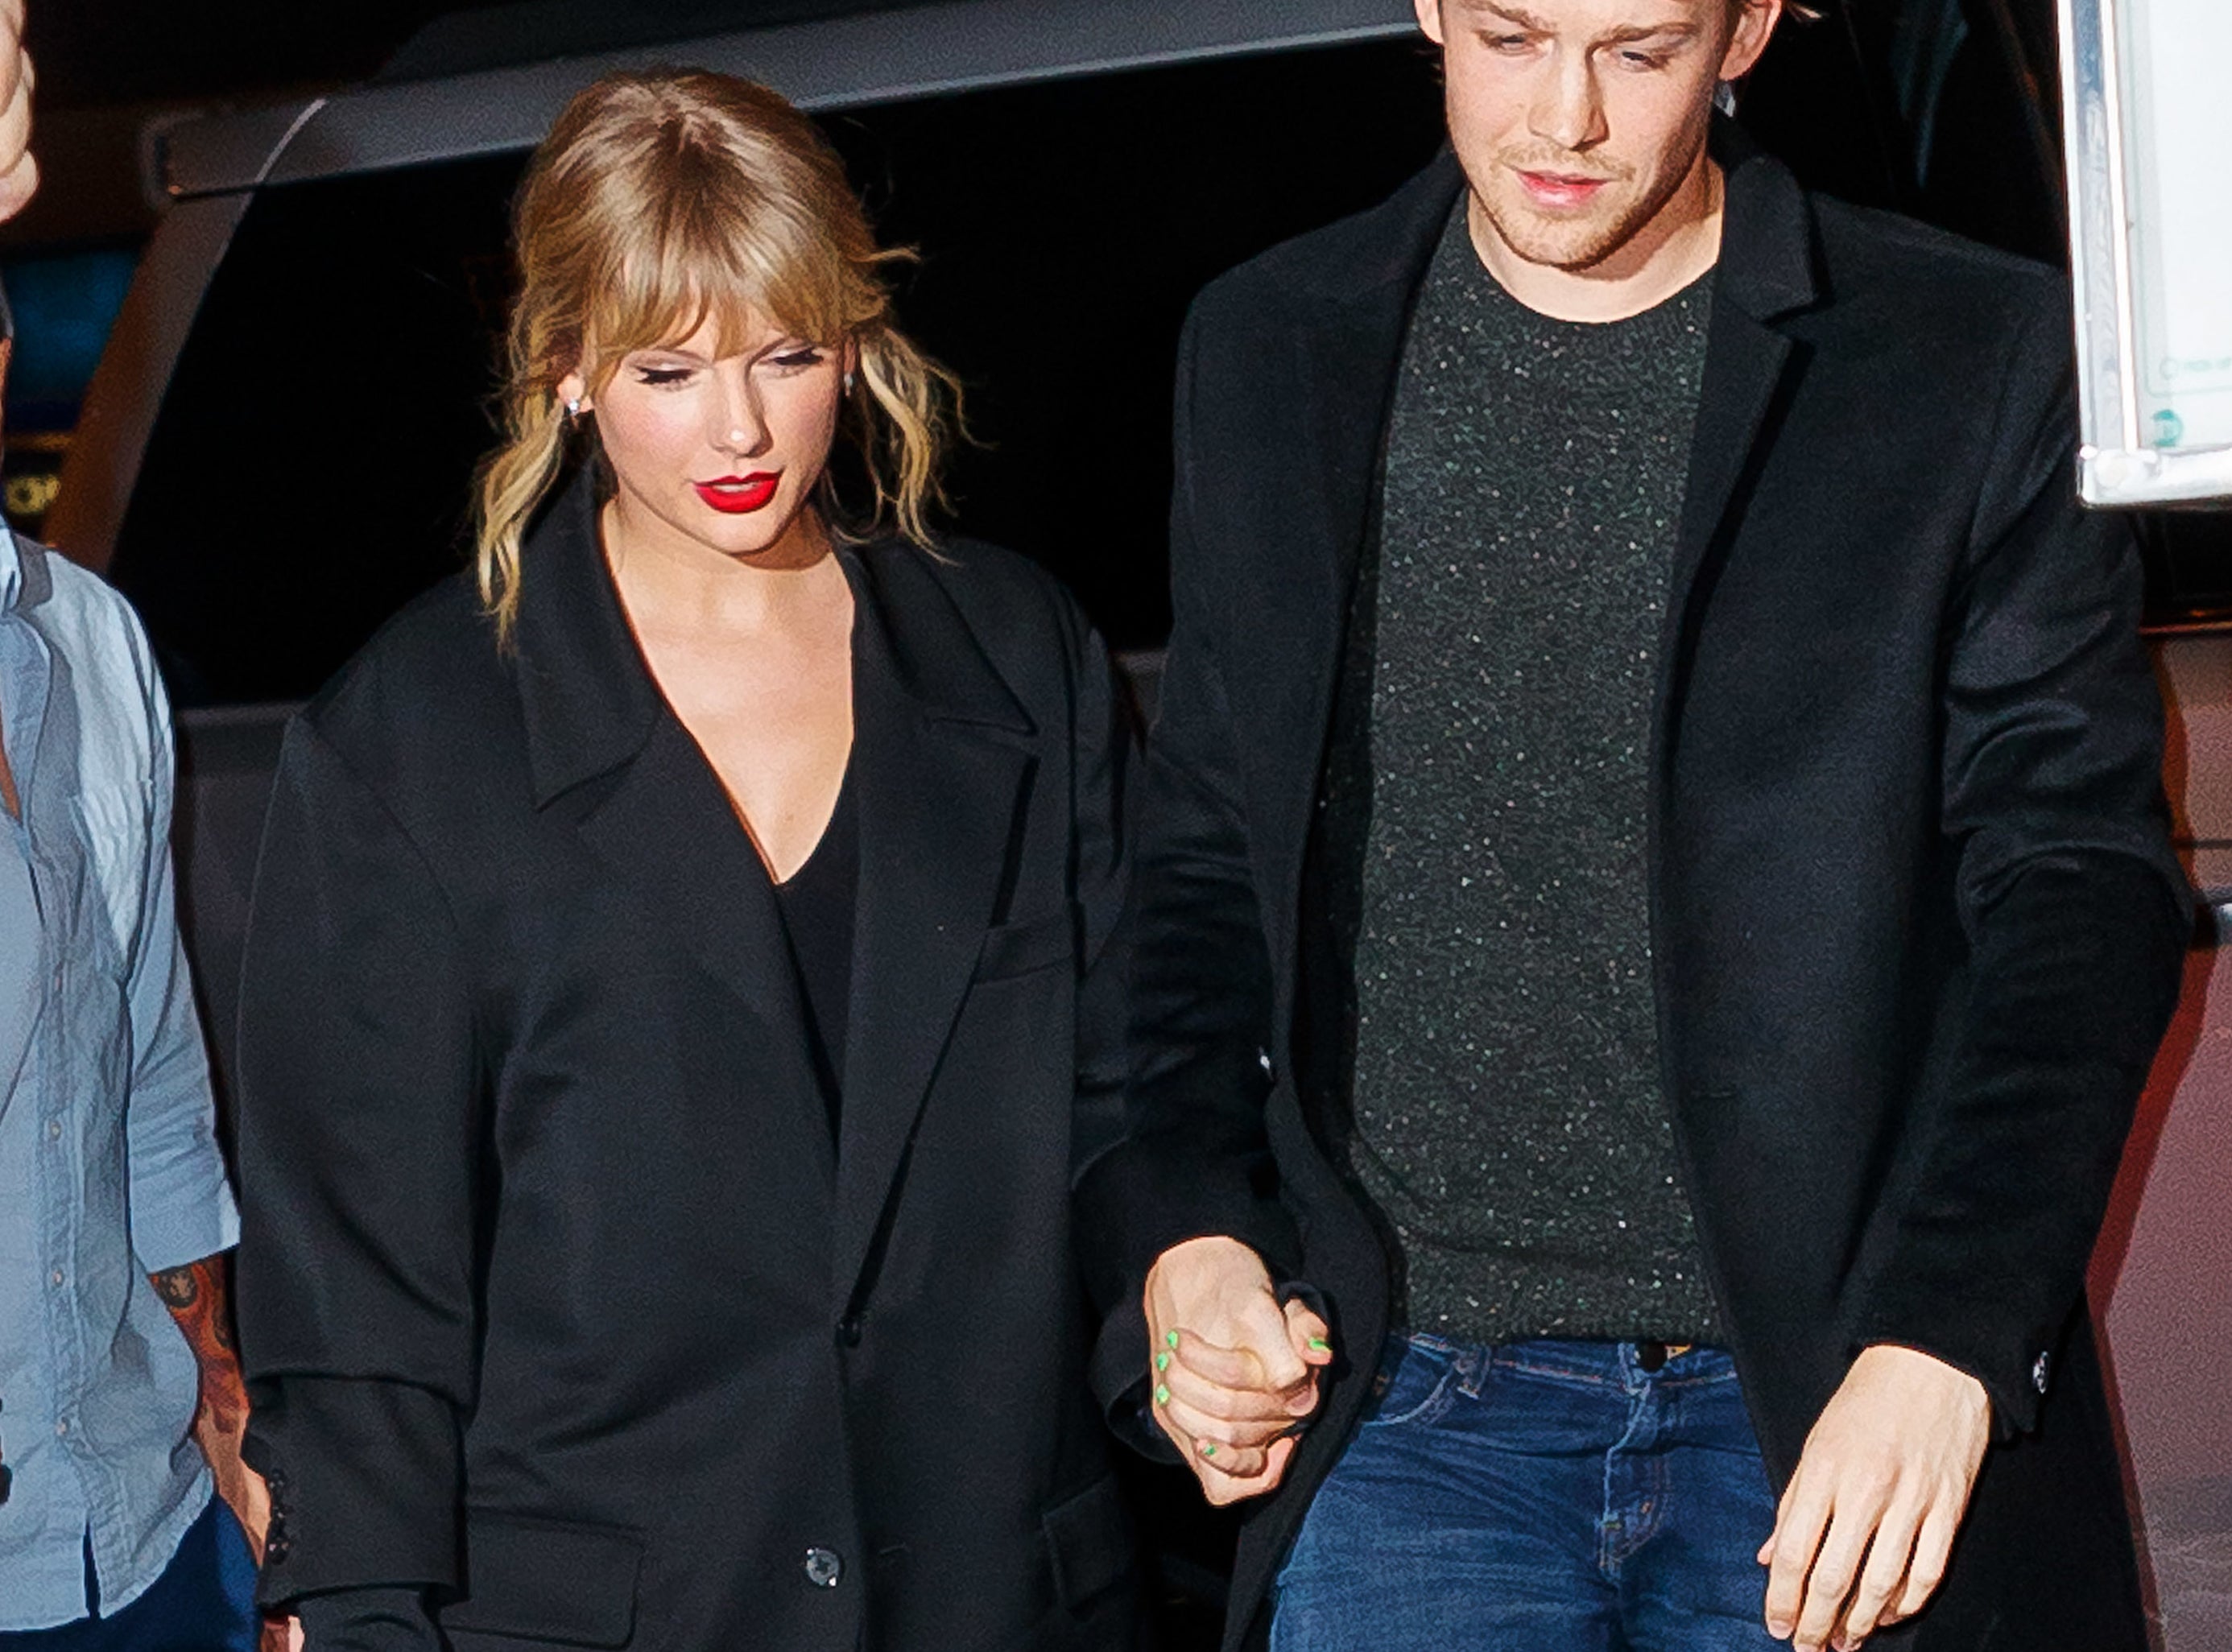 Taylor and Joe hold hands while exiting their car